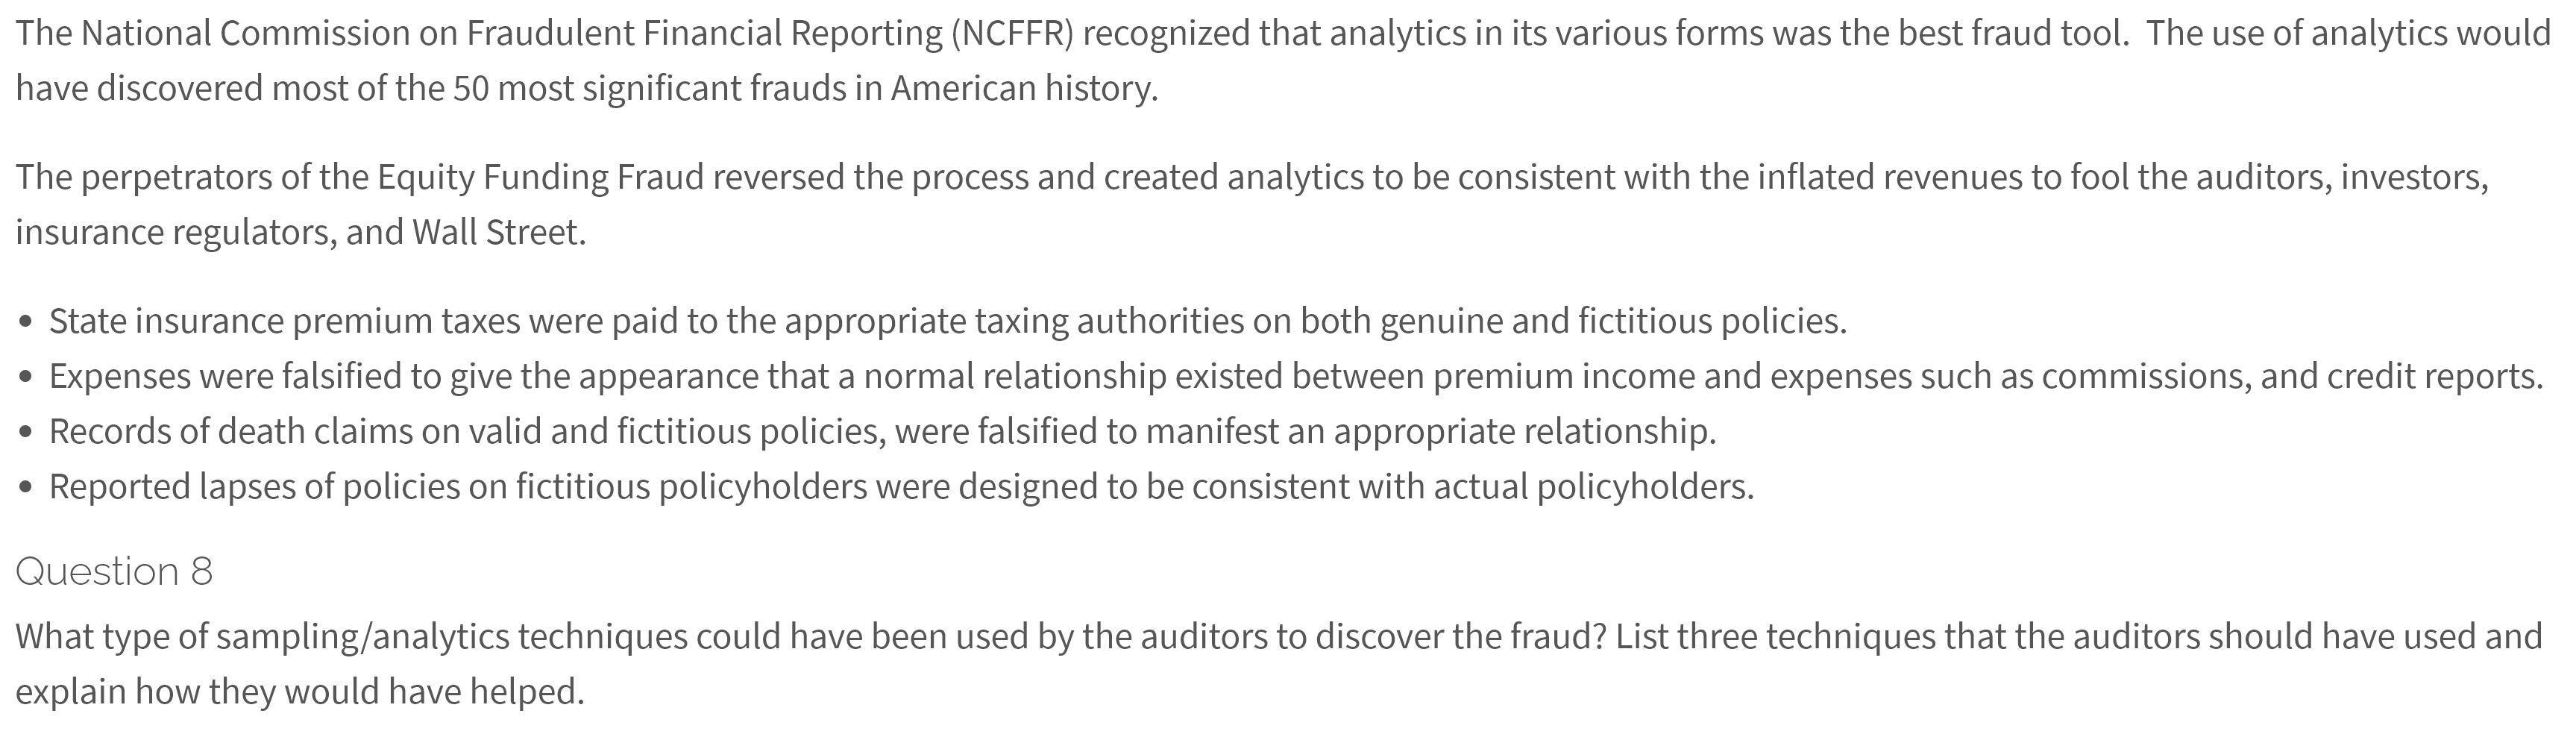 The National Commission on Fraudulent Financial Reporting (NCFFR) recognized that analytics in its various forms was the best